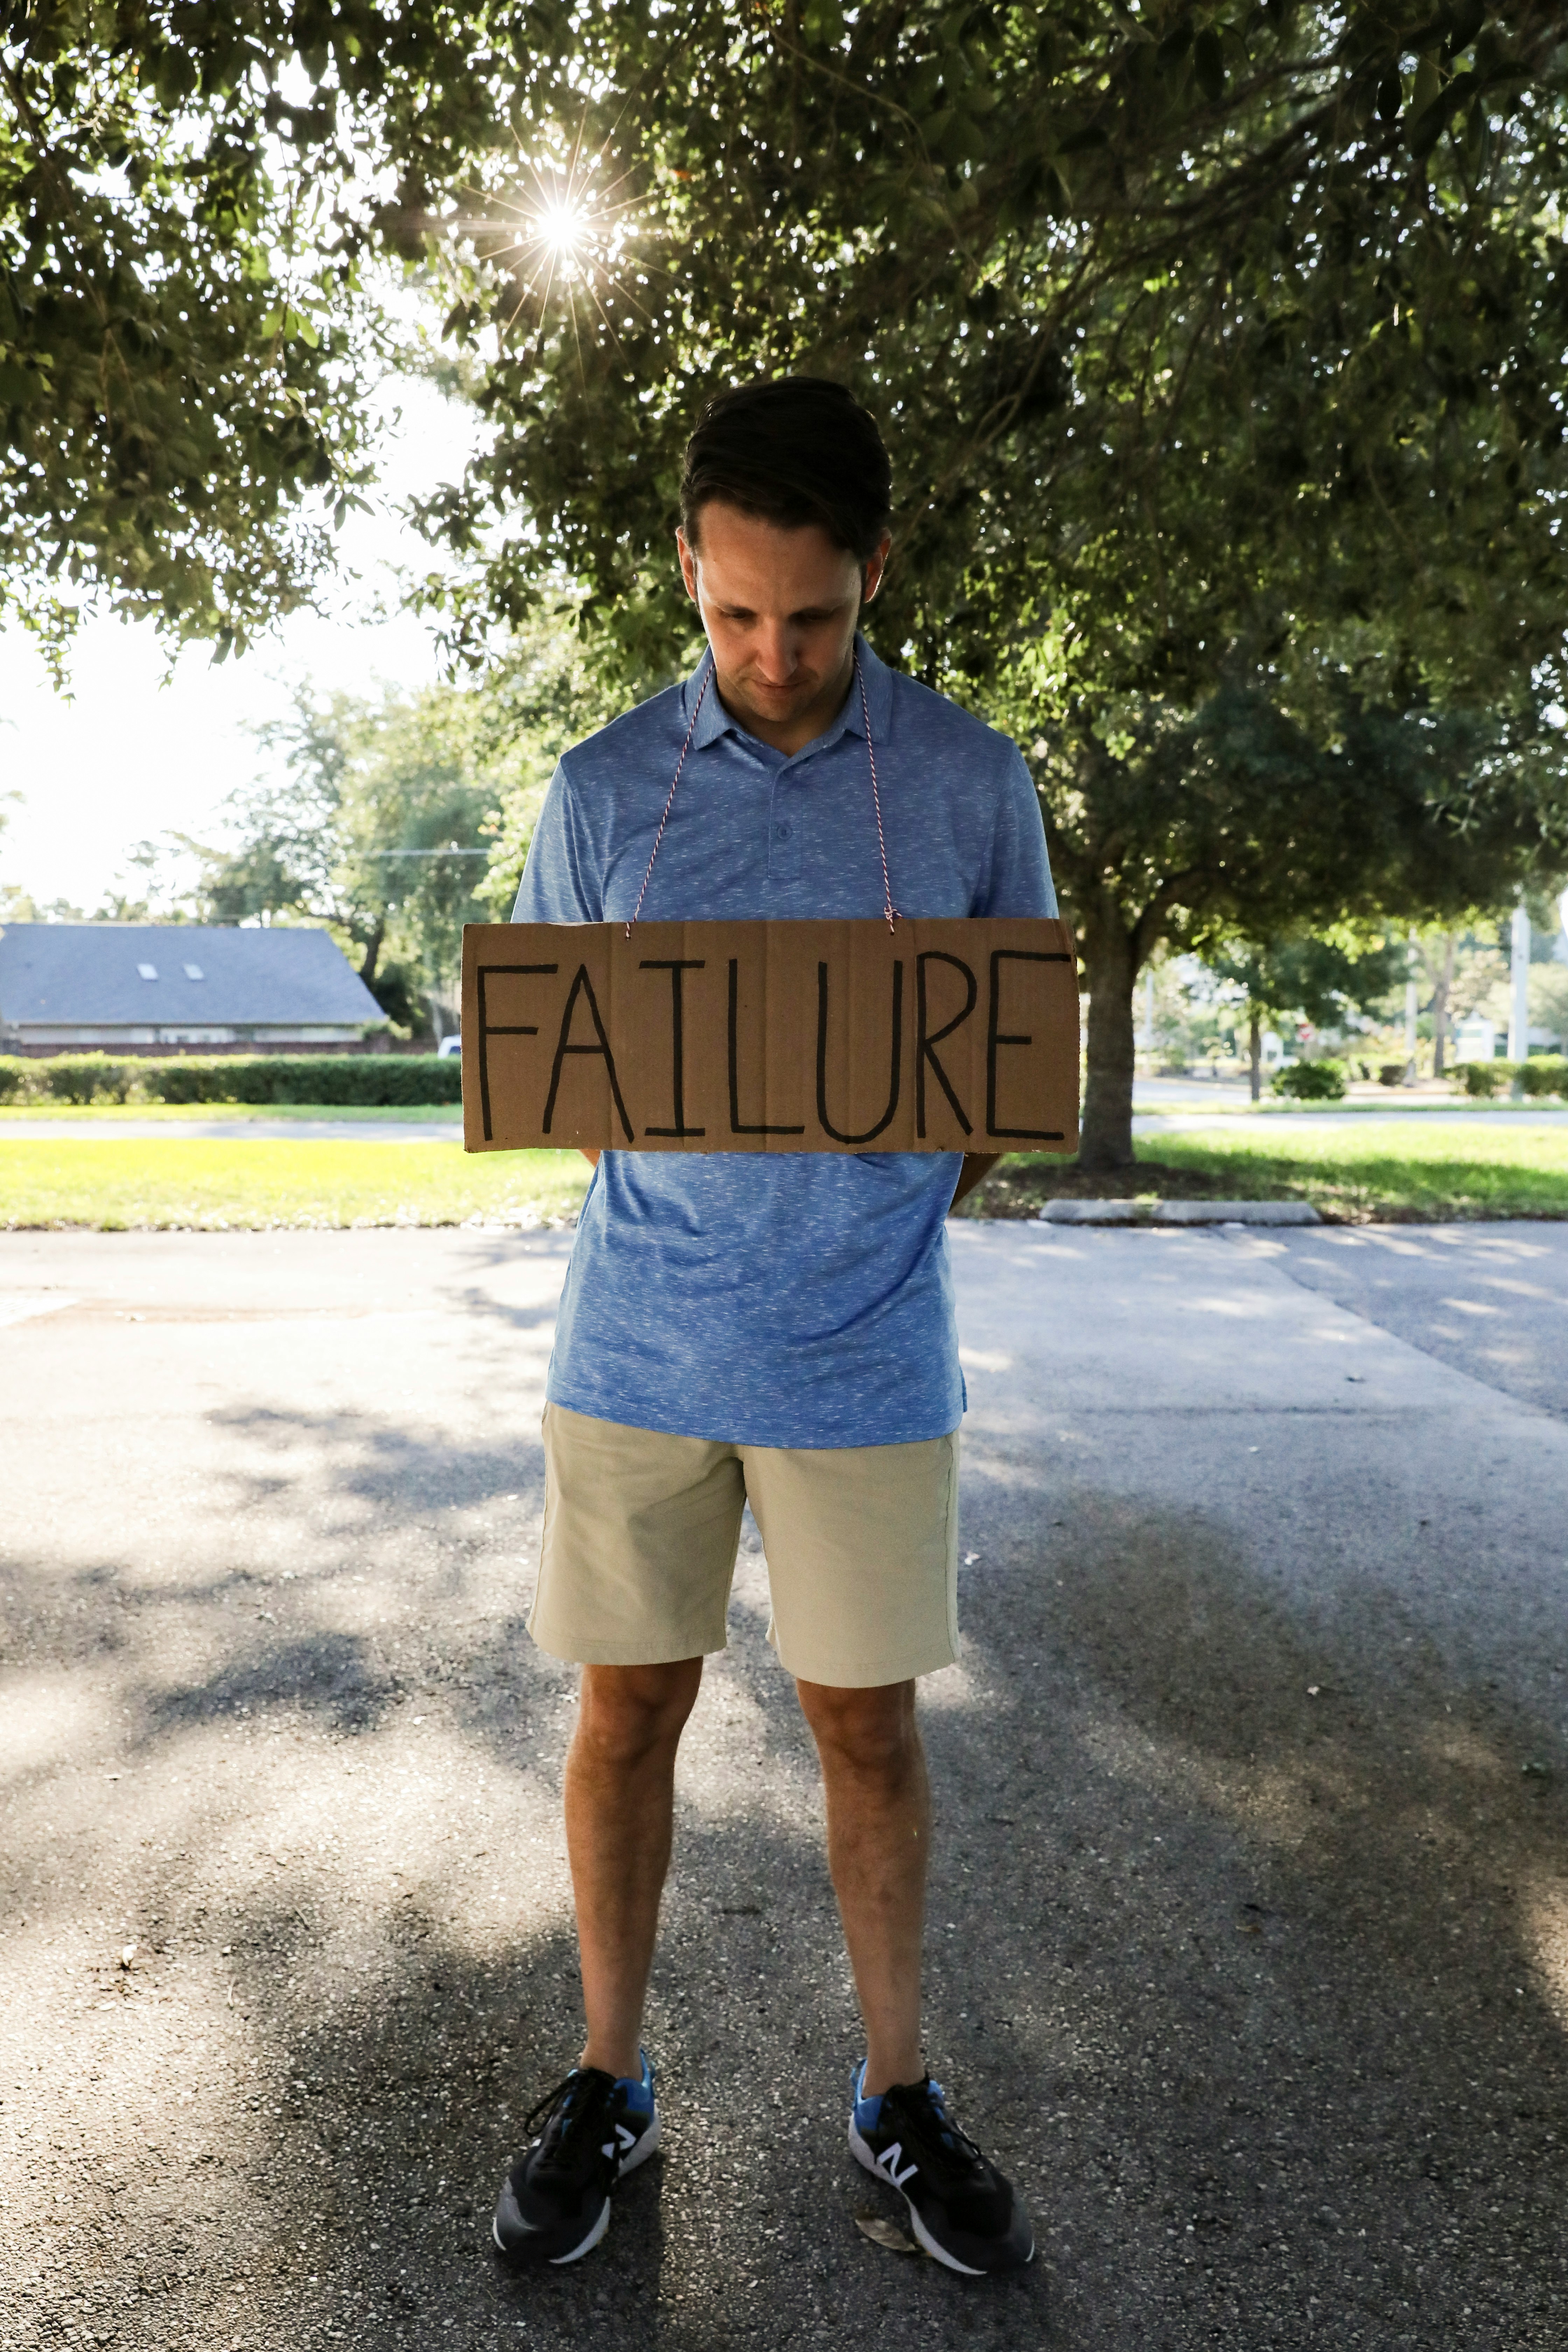 My pastor used the illustration of failure in a sermon recently. I grabbed the sign because I think a lot of us wrestle with failure and self-doubt.